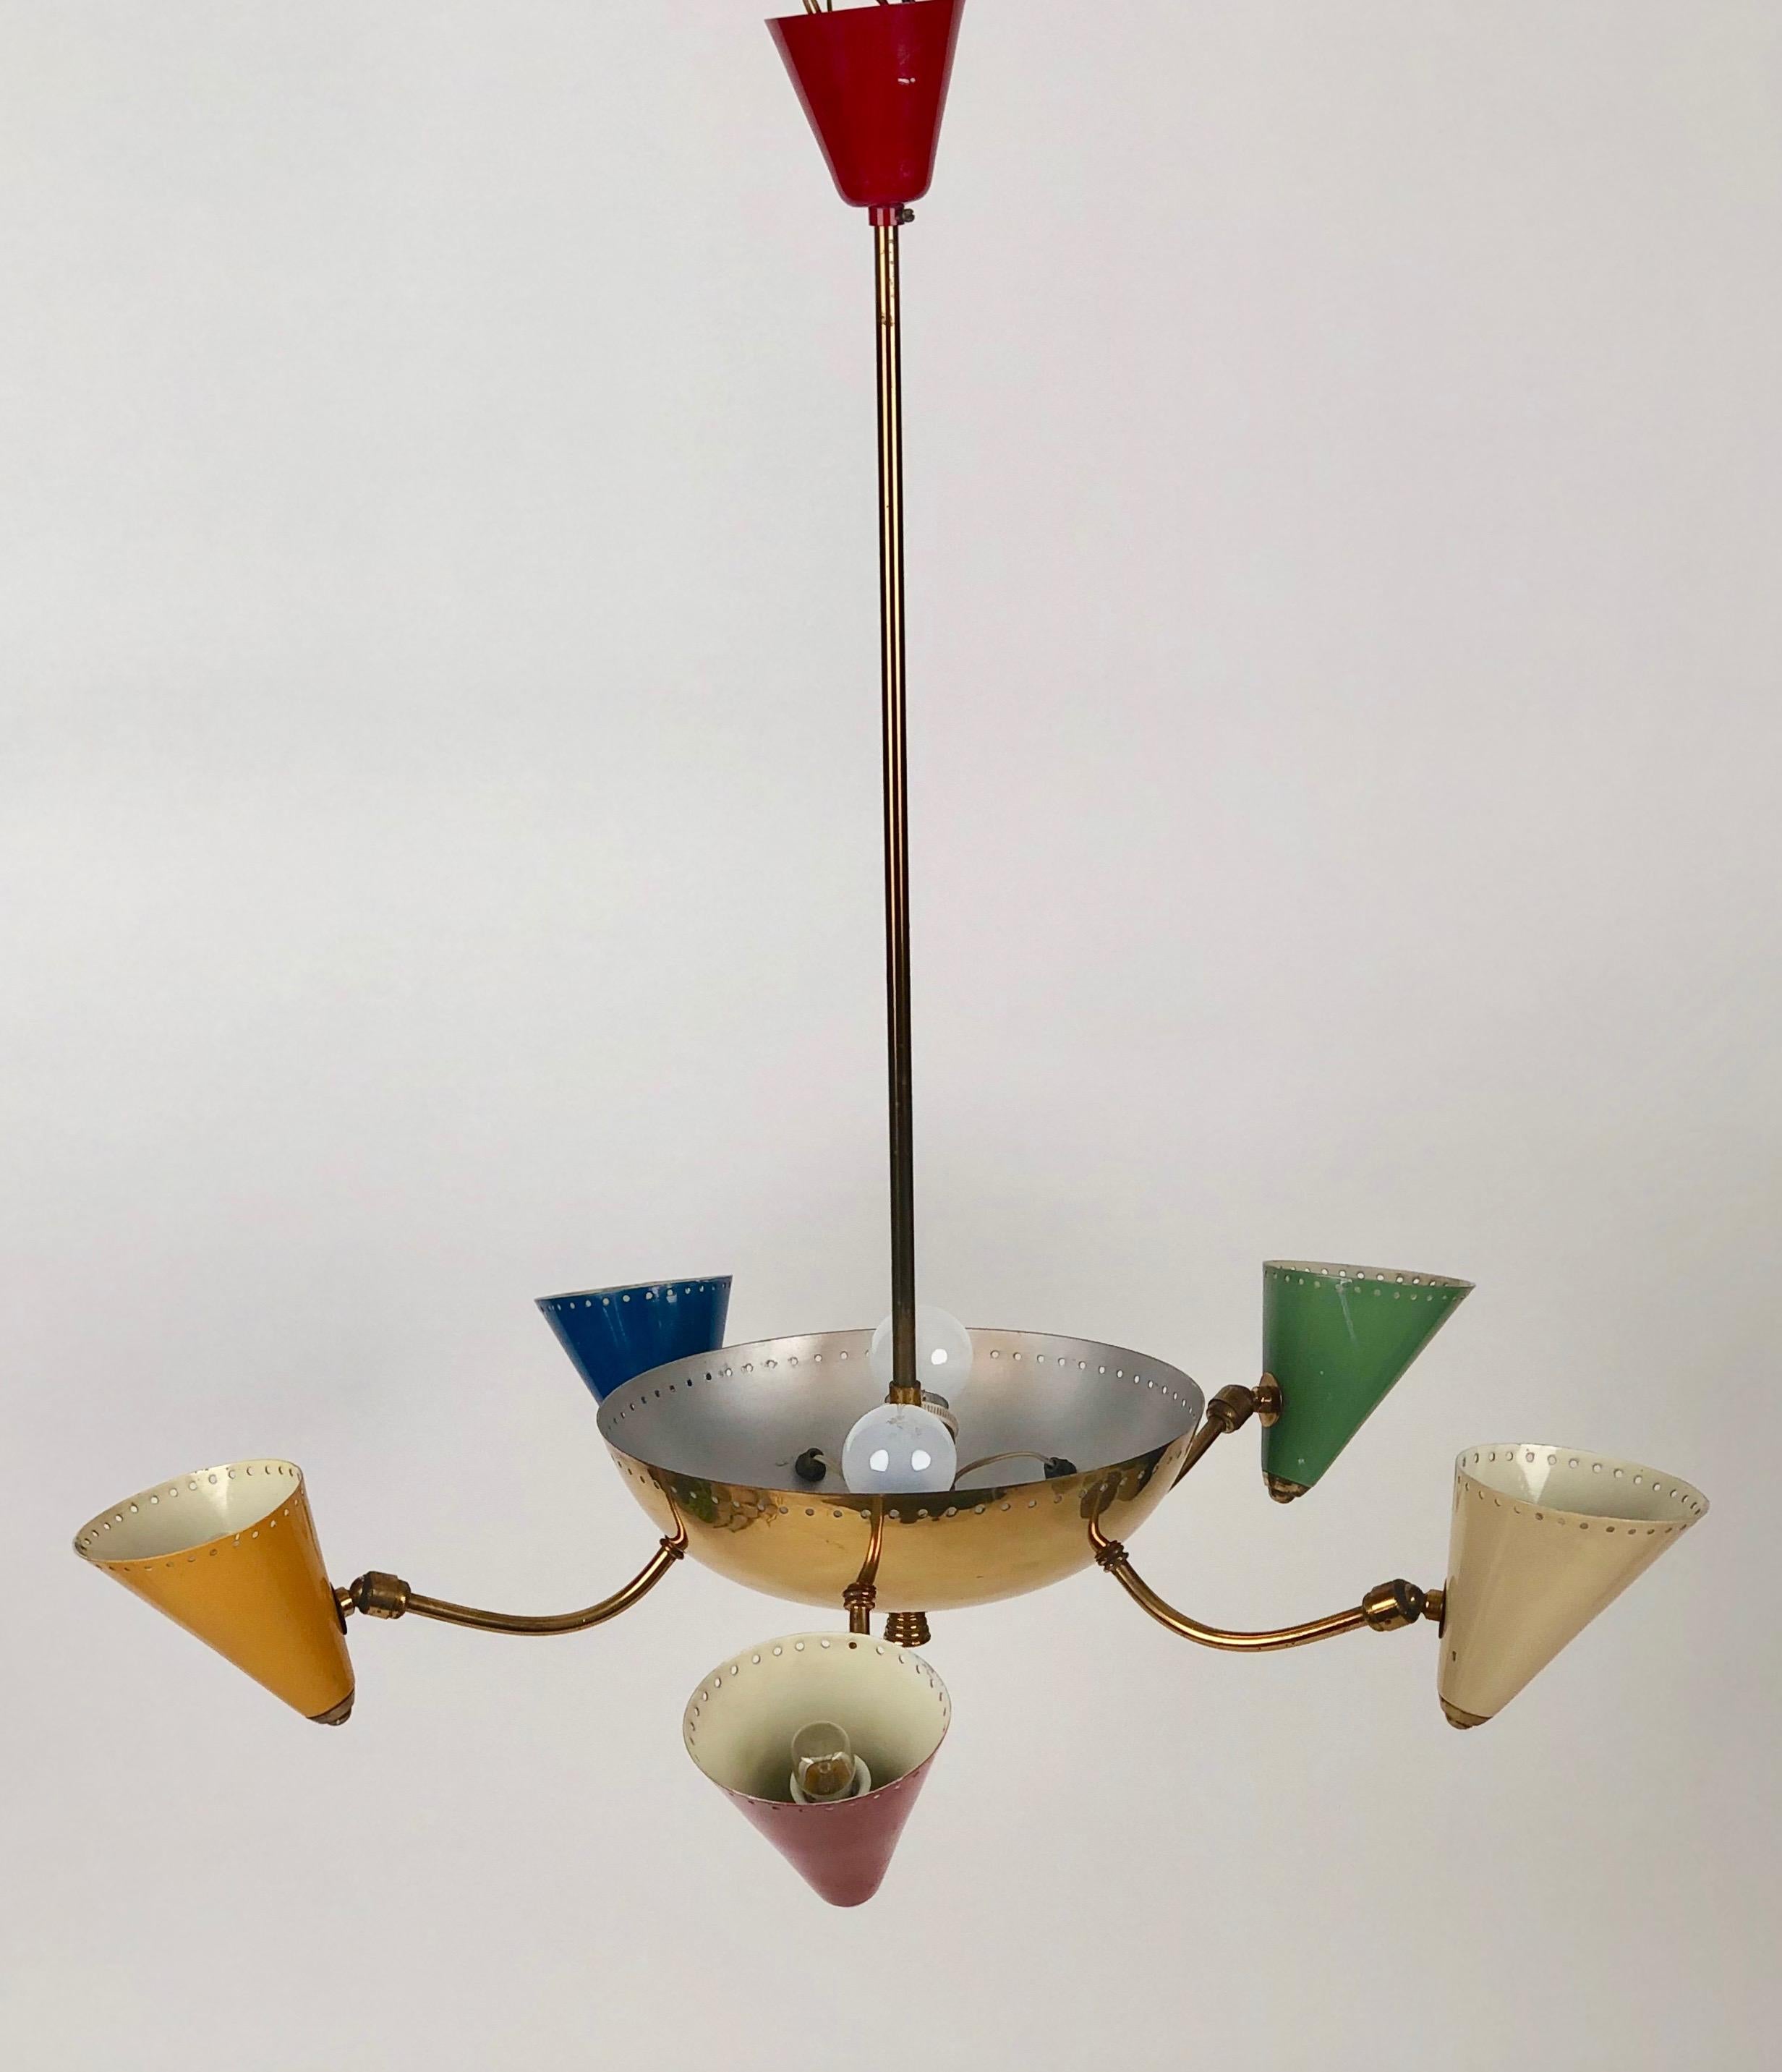 Italian pendant lamp from the 1950's. Five arms extending from a brass reflector, each arm has a ball and socket joint which gives the small cone maximum flexibility in the gestalt.
By the cones, the light bulb would be the same as those used in